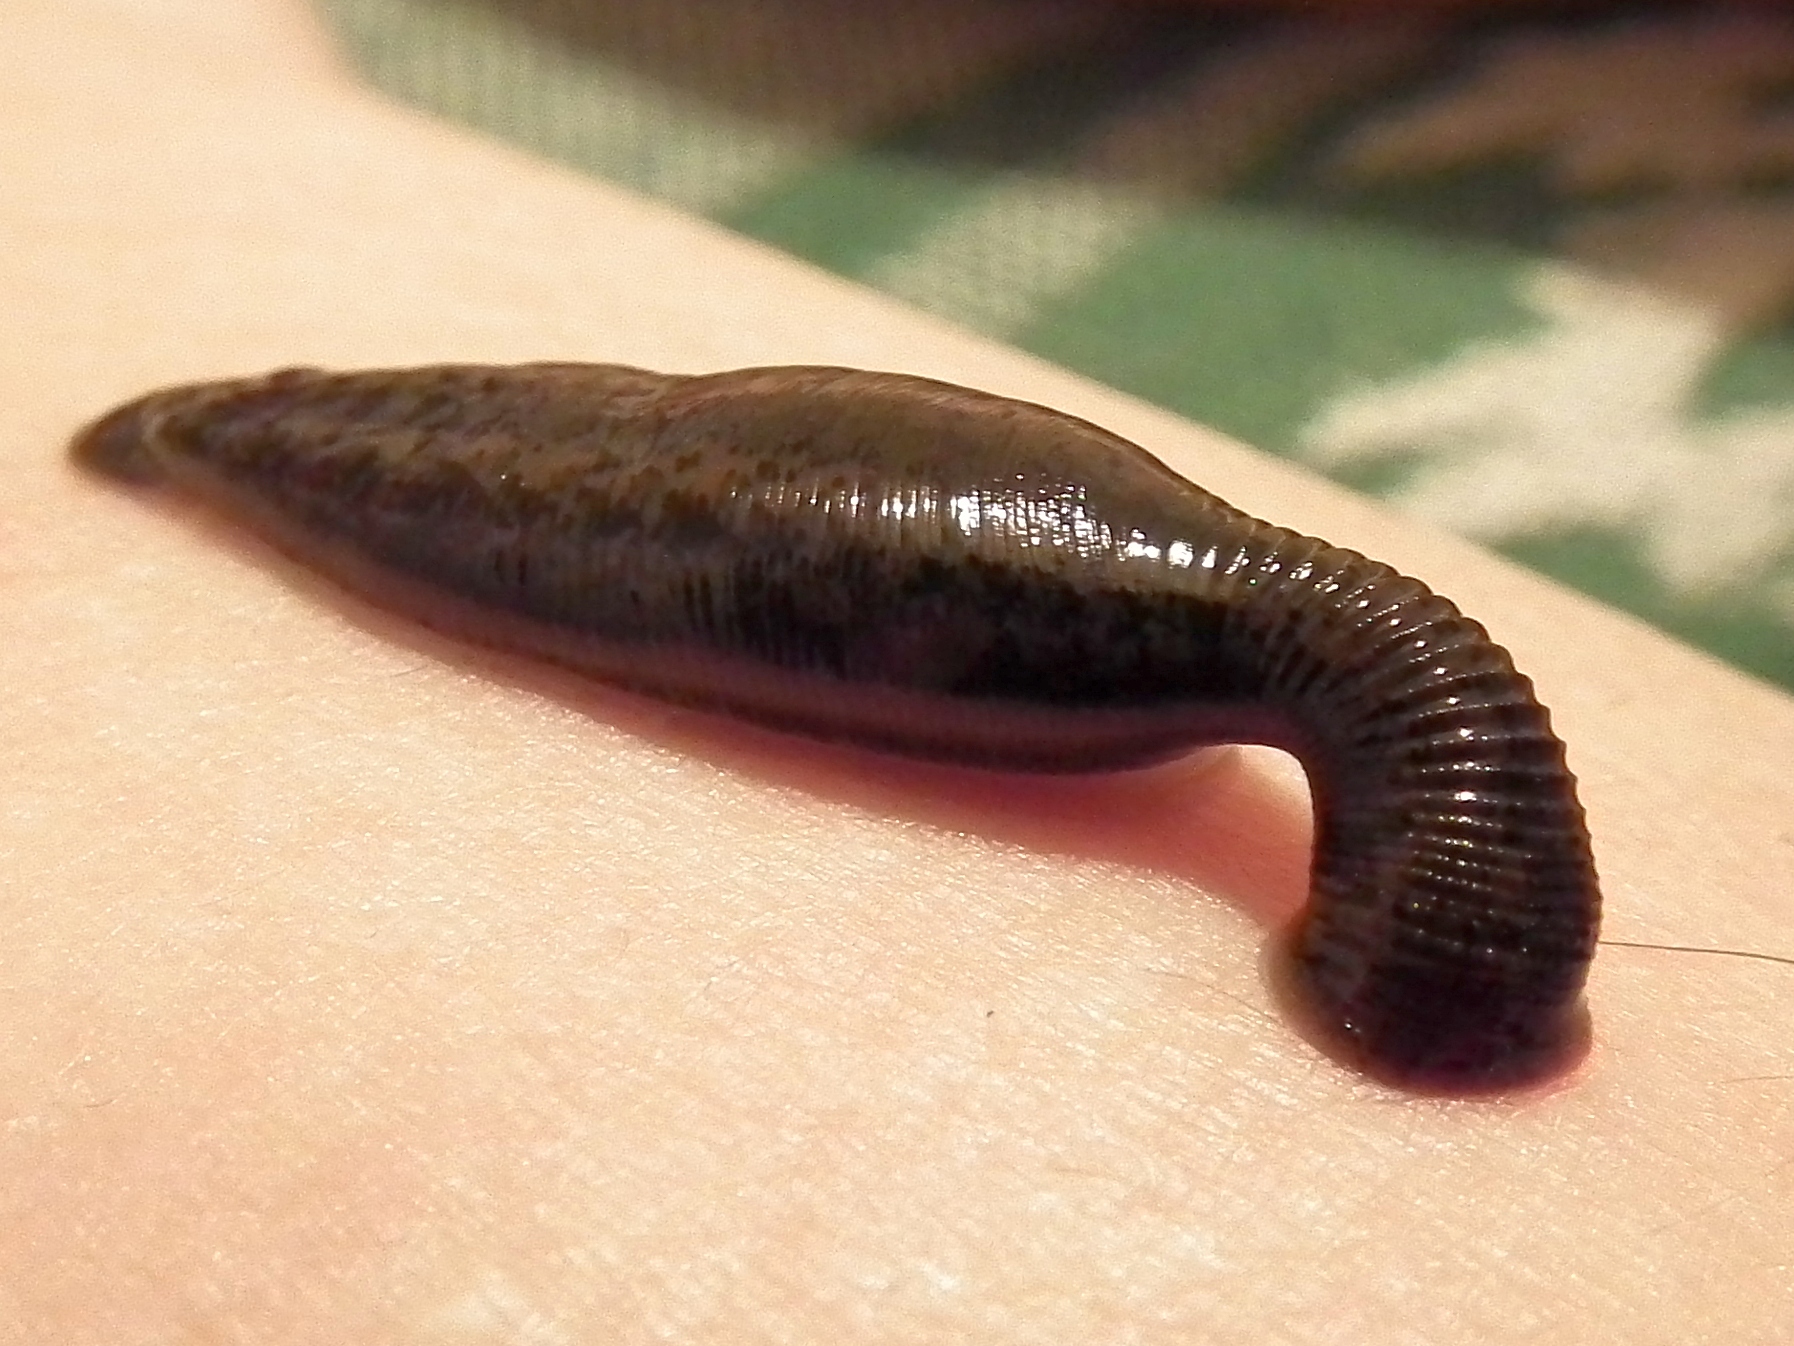 Leech Therapy | Can Leeches Kill You